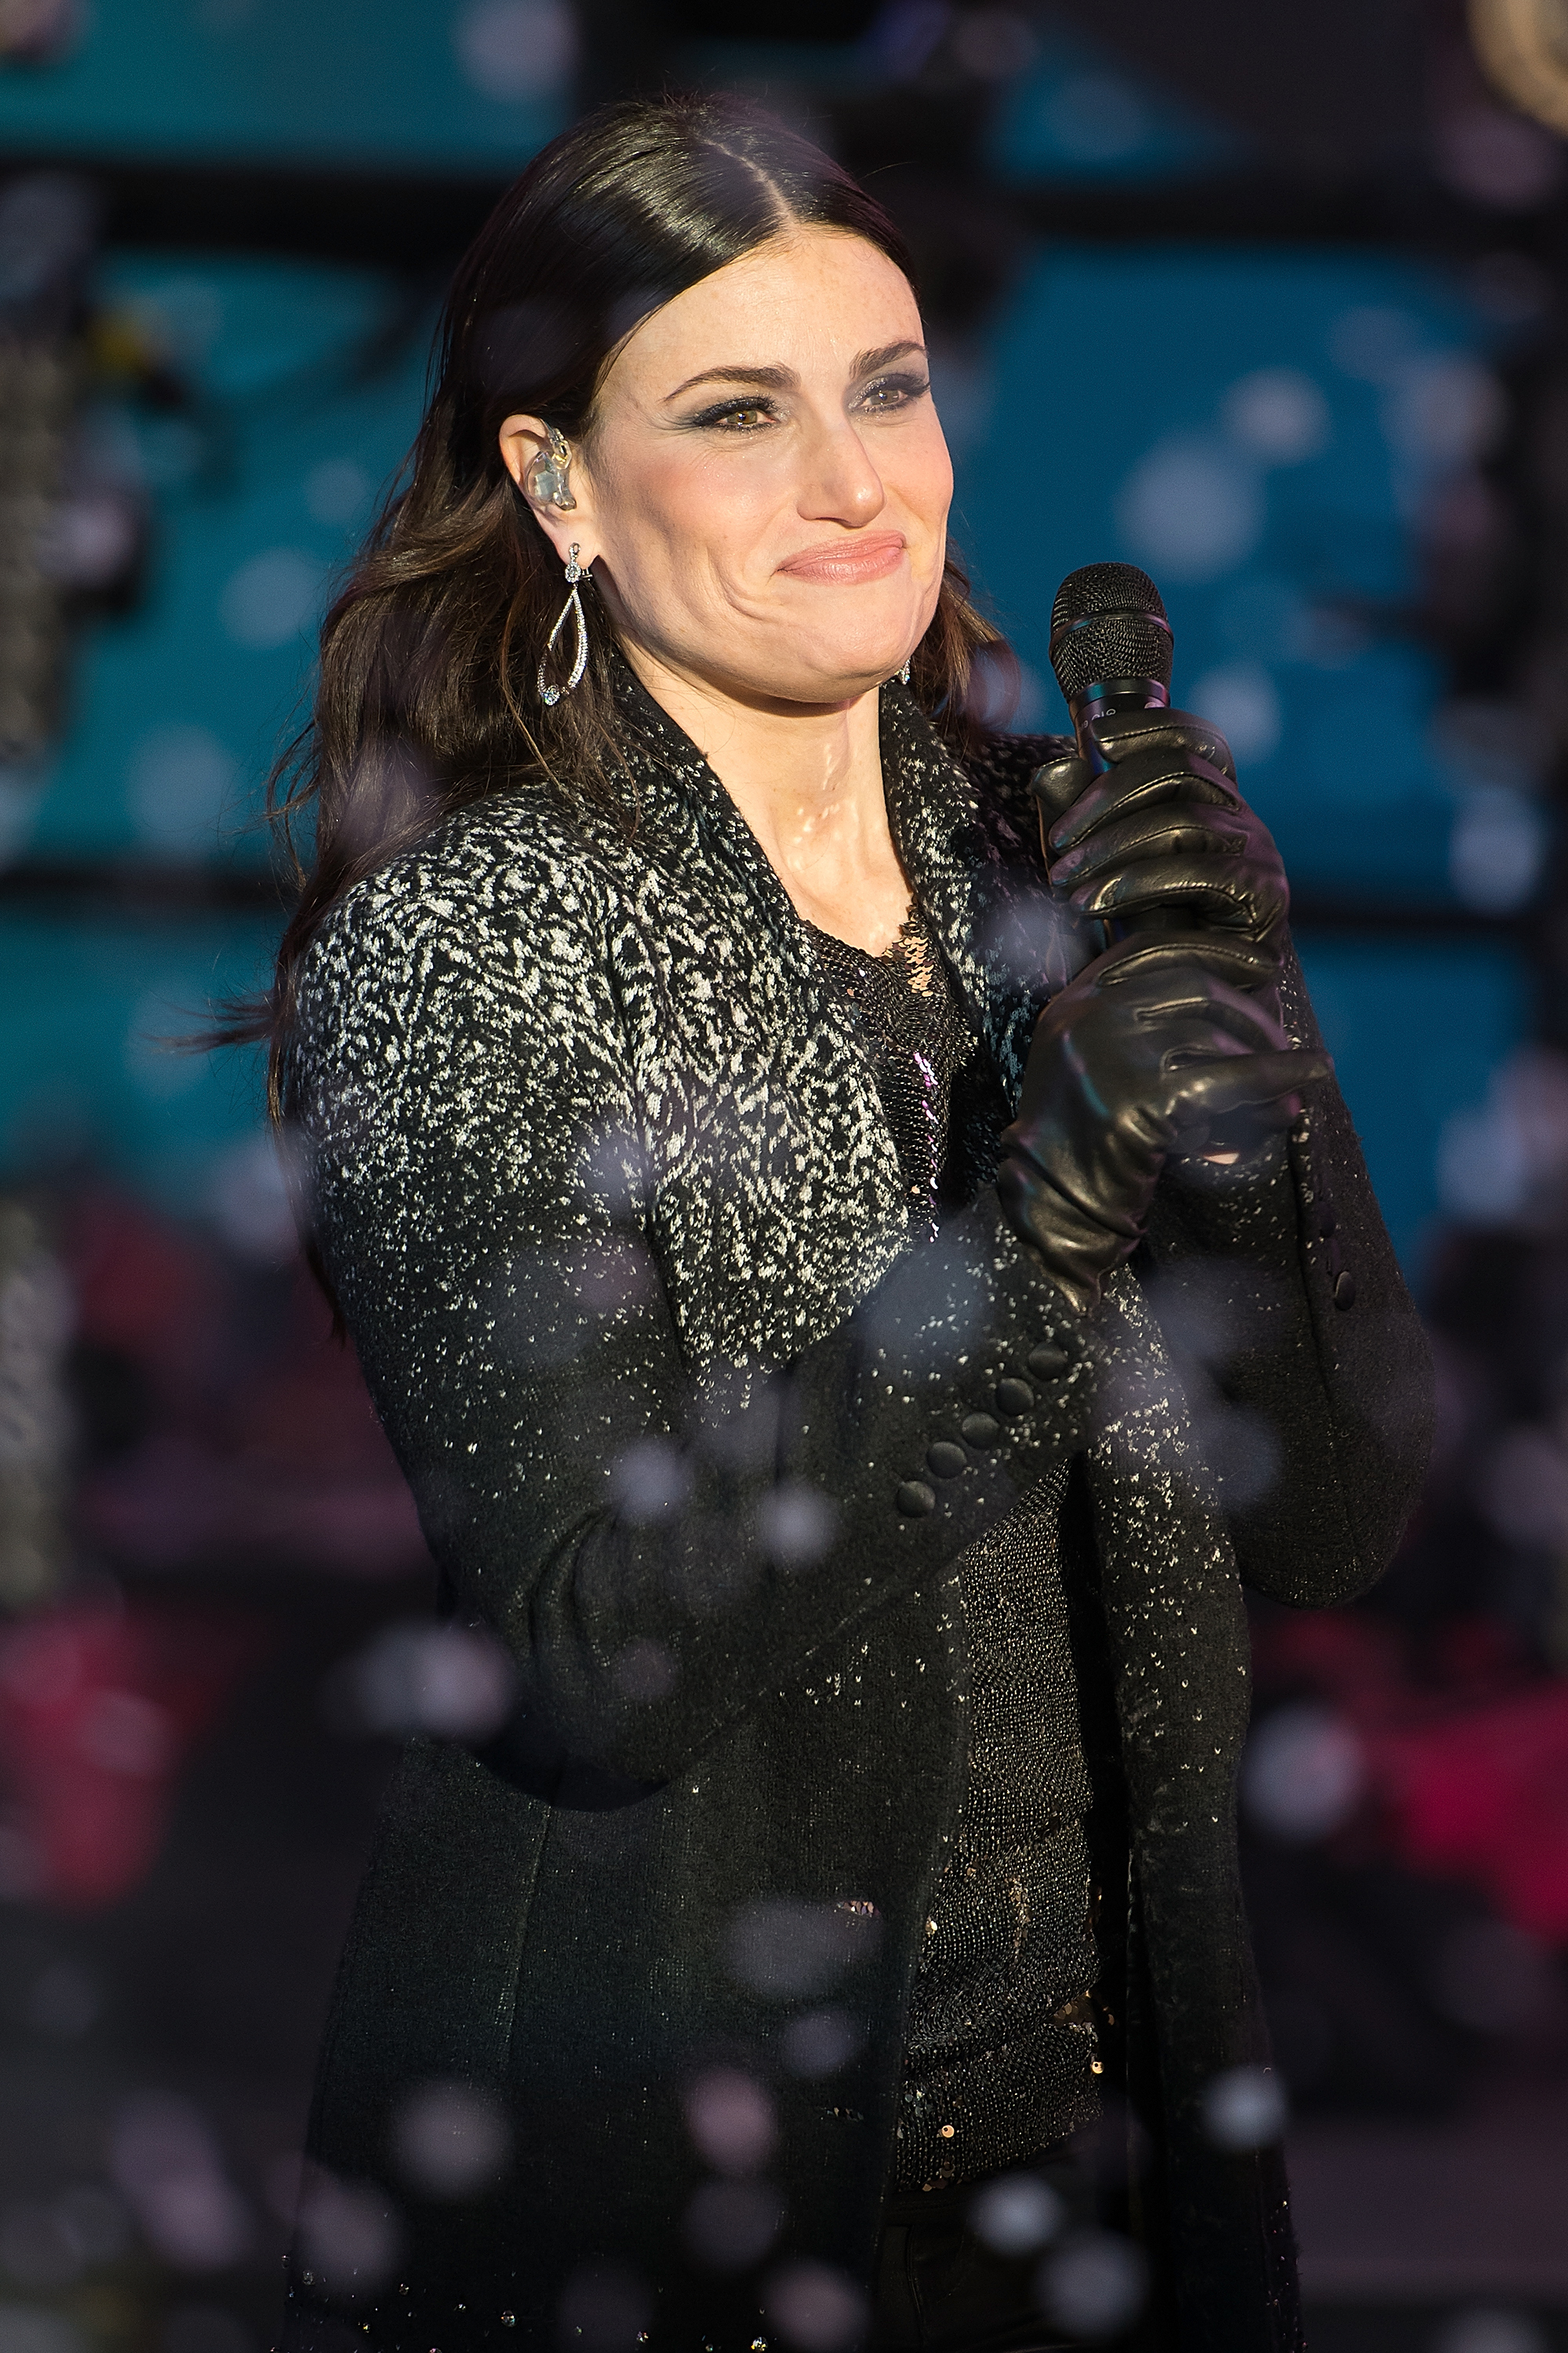 Singer Idina Menzel performs during New Year's Eve 2015 in Times Square at Times Square on Dec. 31, 2014 in New York City.